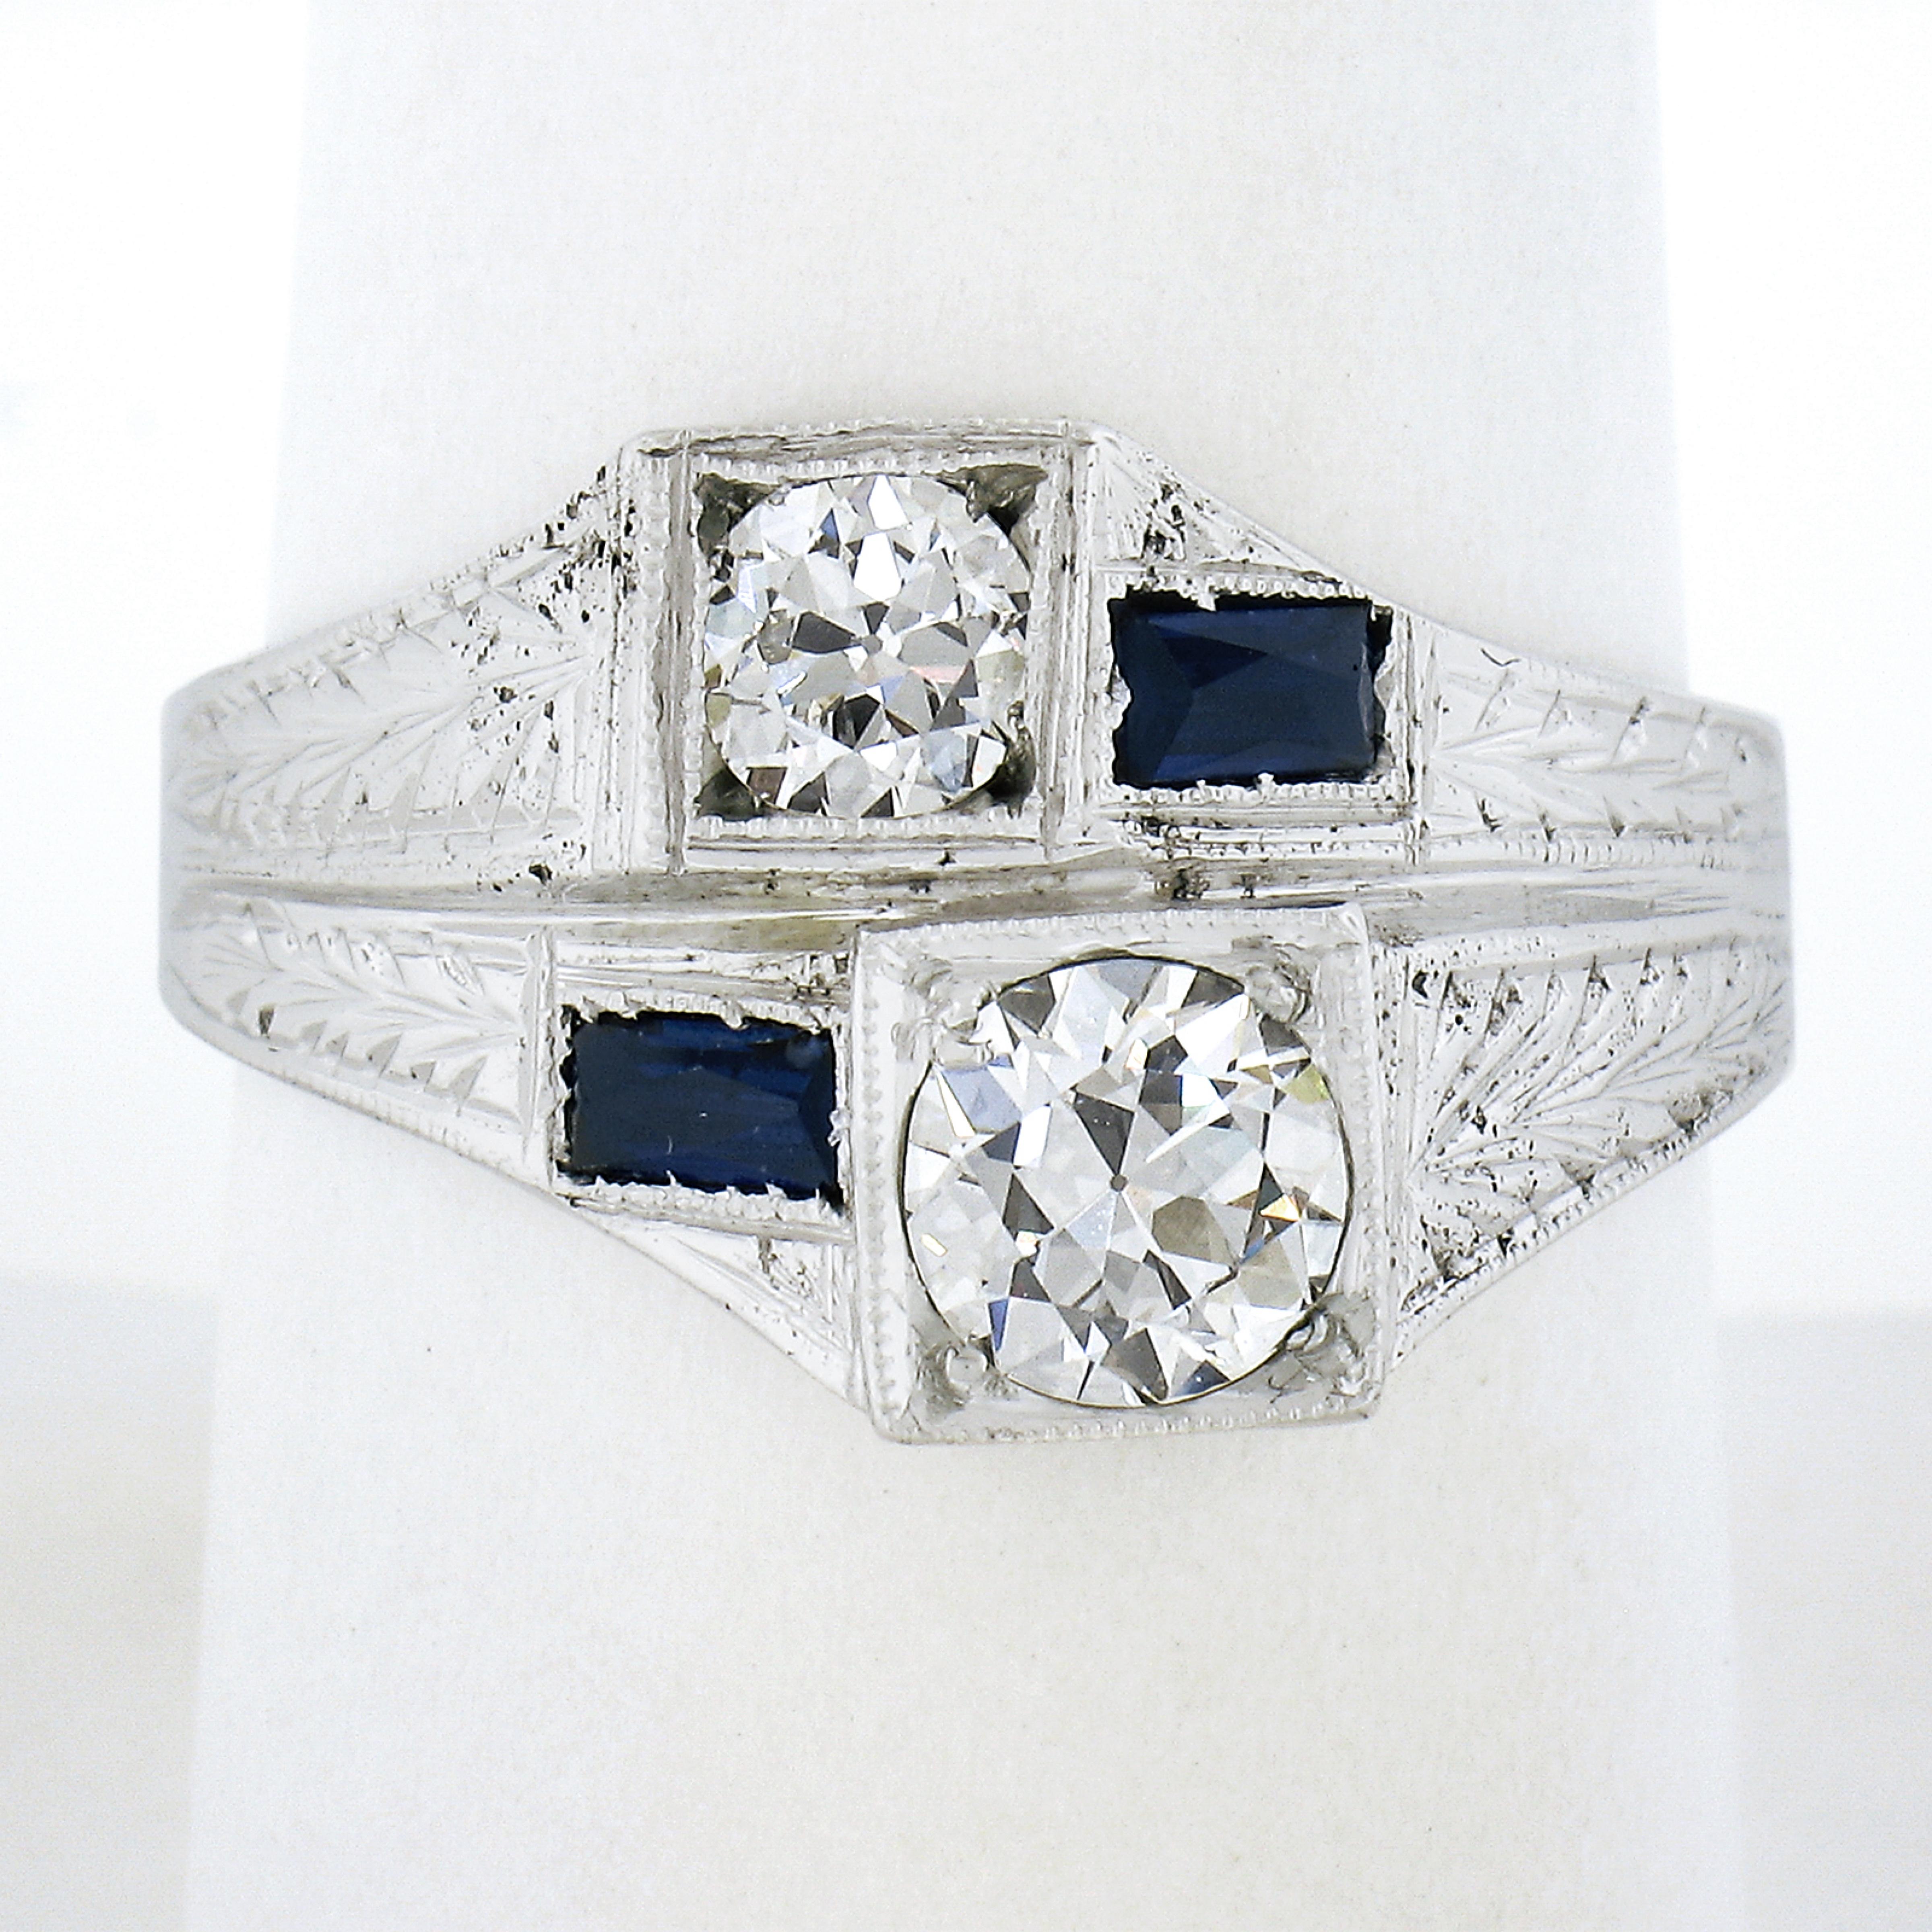 This fine Moi et Toi, bypass ring is very well crafted in solid white gold and features lively white old cut diamonds with sapphire accents for a very Art Deco look! Enjoy :)

--Stone(s):--
(1) Natural Genuine Diamond - Old Cut - Prong Set - **See